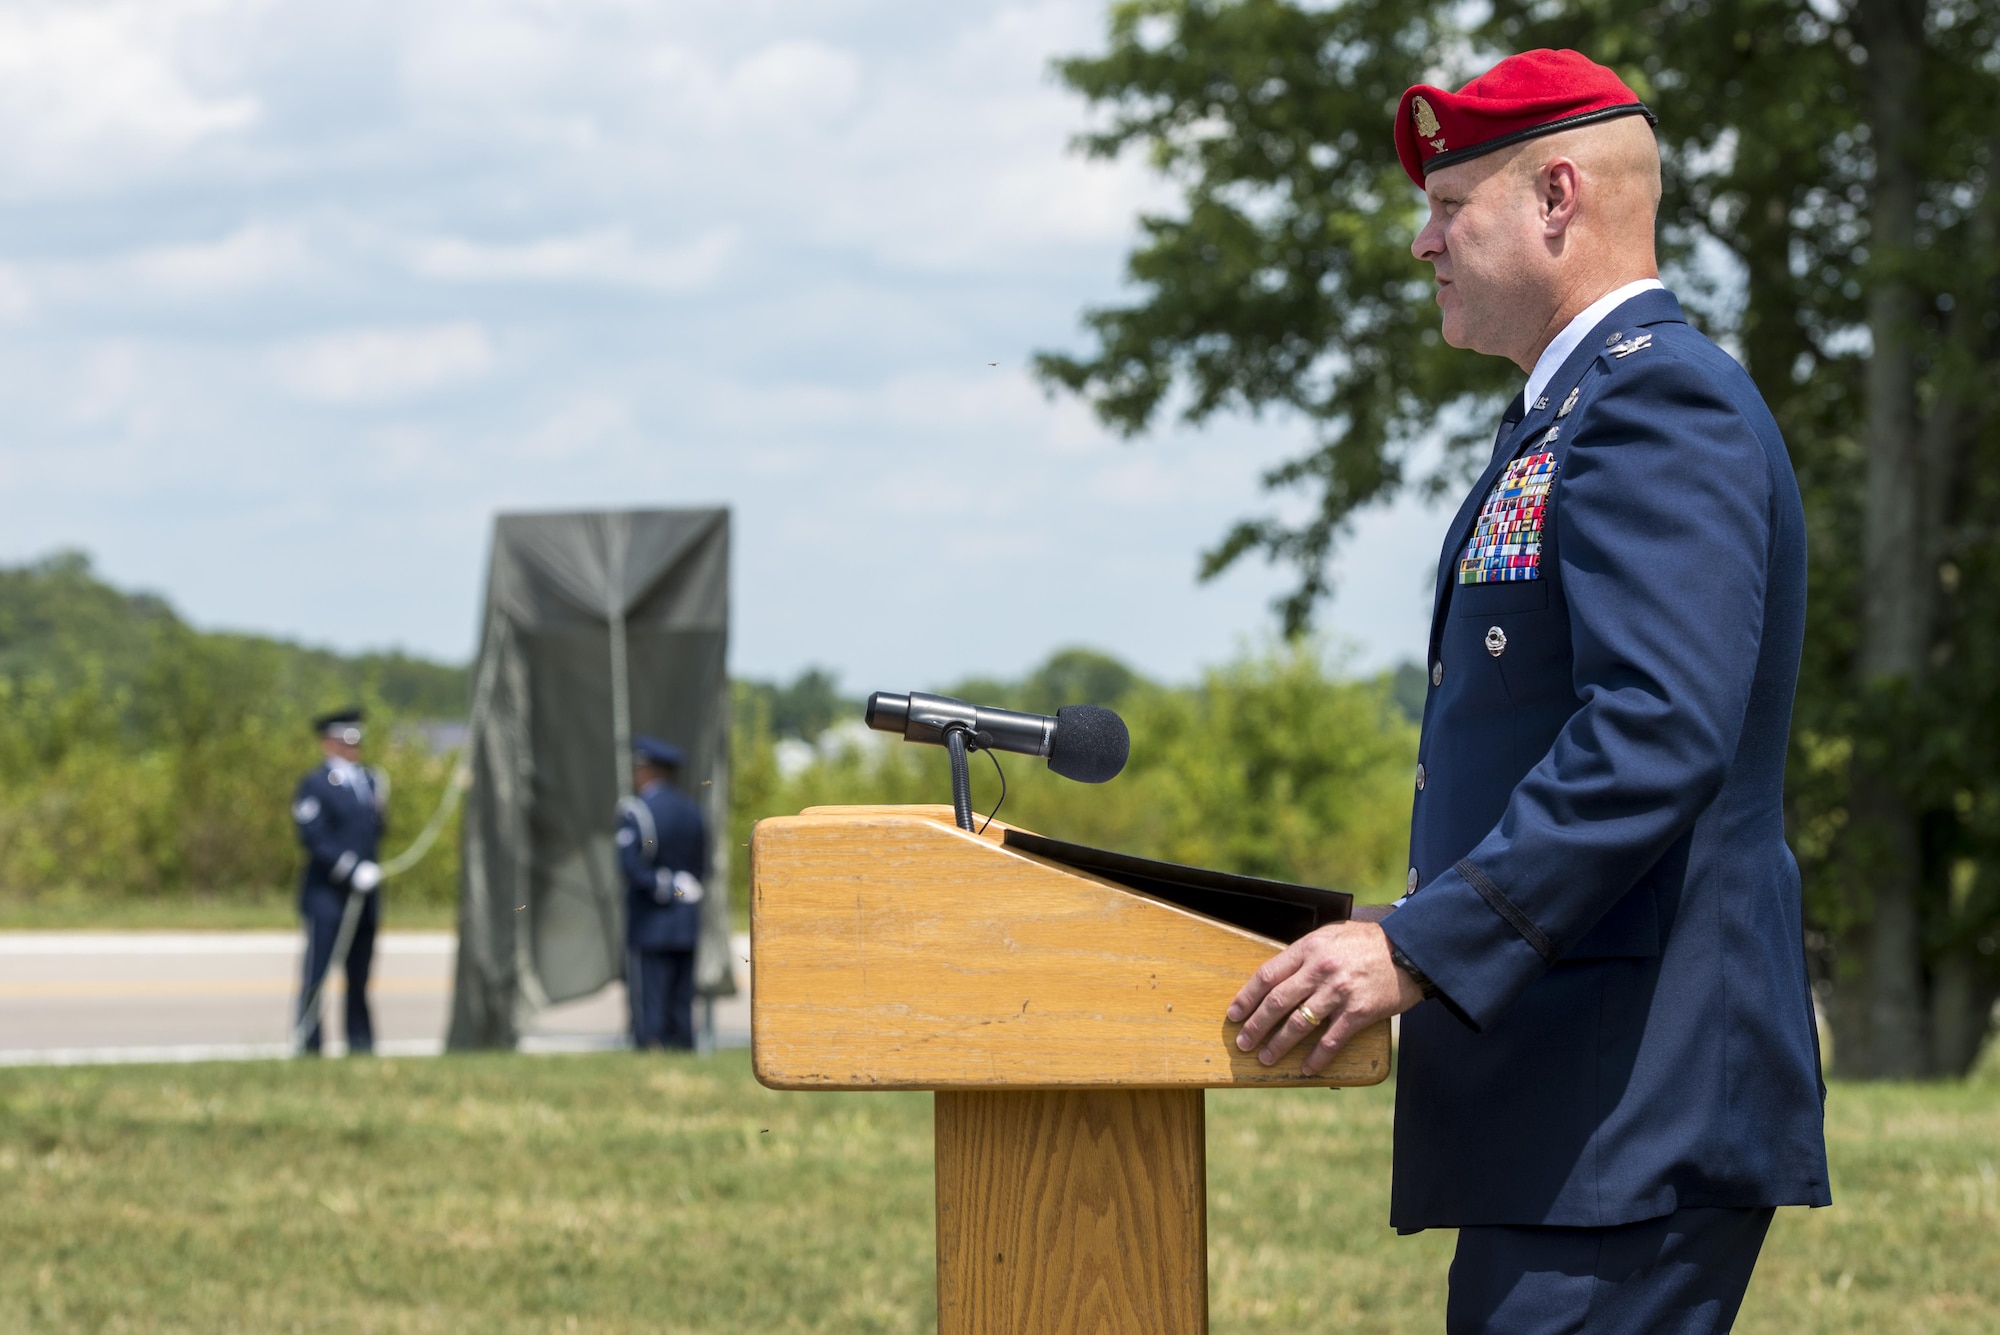 Col. Michael Martin speaks during a ceremony dedicating a six-mile stretch of Highway 121 in honor of Master Sgt. William L. McDaniel II's namesake in Greenville, Ohio, Aug. 14, 2017. McDaniel was a a Special Tactics pararescueman who was killed when the MH-47 Chinook helicopter he was in crashed in the Philippines Feb. 22, 2002. A pararescueman’s unique technical rescue skill sets are utilized during humanitarian and combat operations; they deploy anywhere, anytime, employ air-land-sea tactics into restricted environments to authenticate, extract, treat, stabilize and evacuate injured or isolated personnel. (U.S. Air Force photo by Wesley Farnsworth)